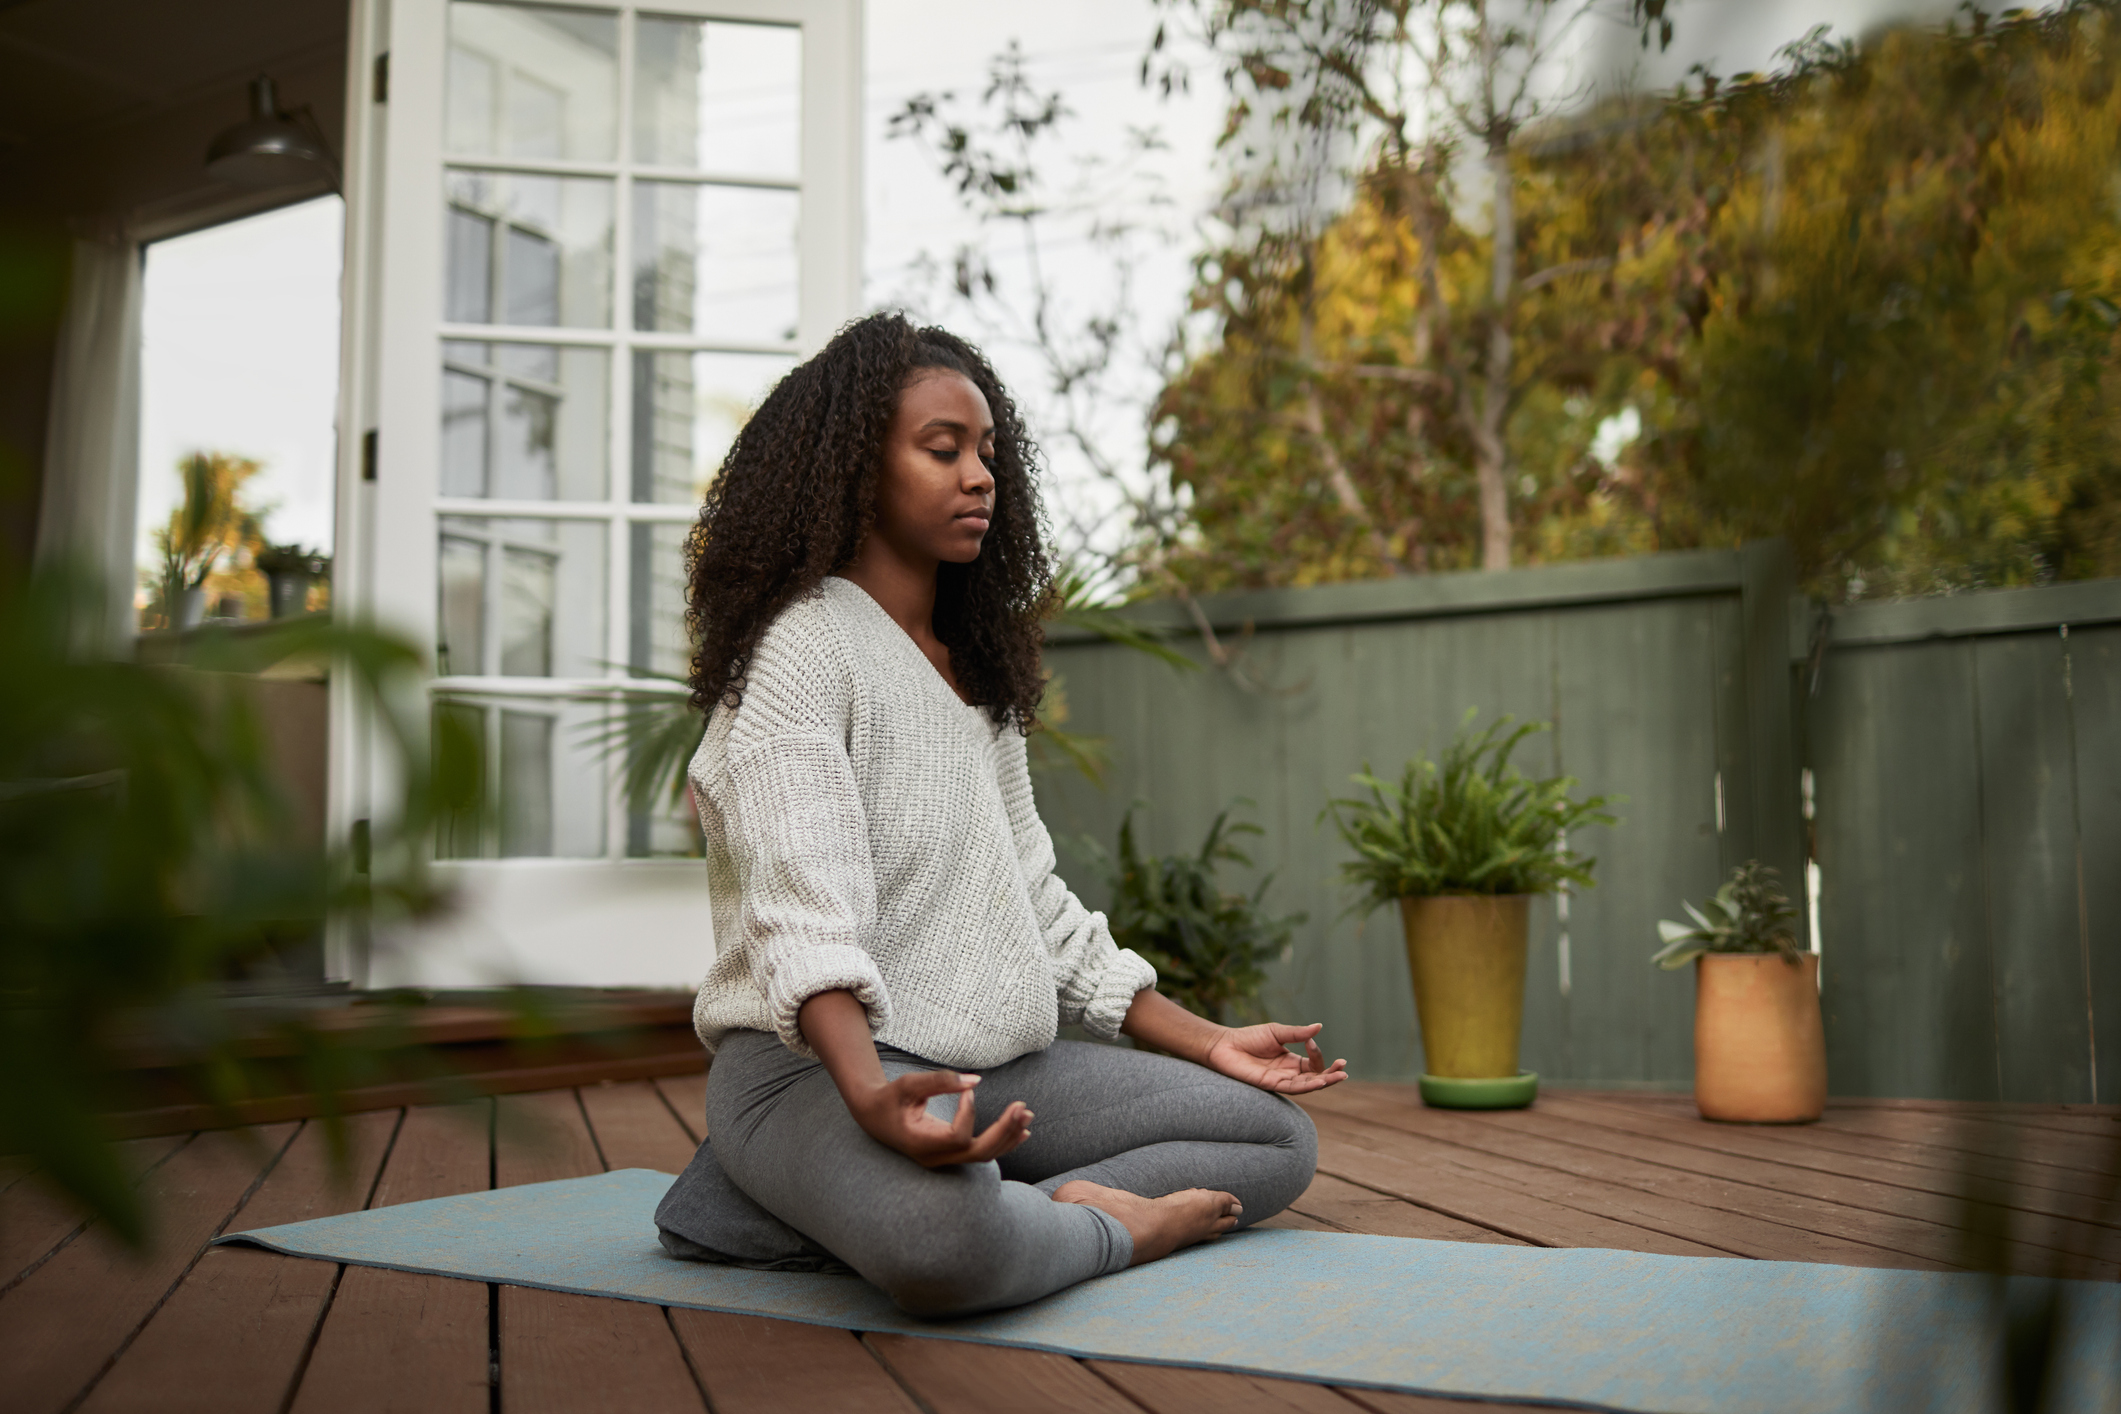 Black woman meditating on outdoor porch